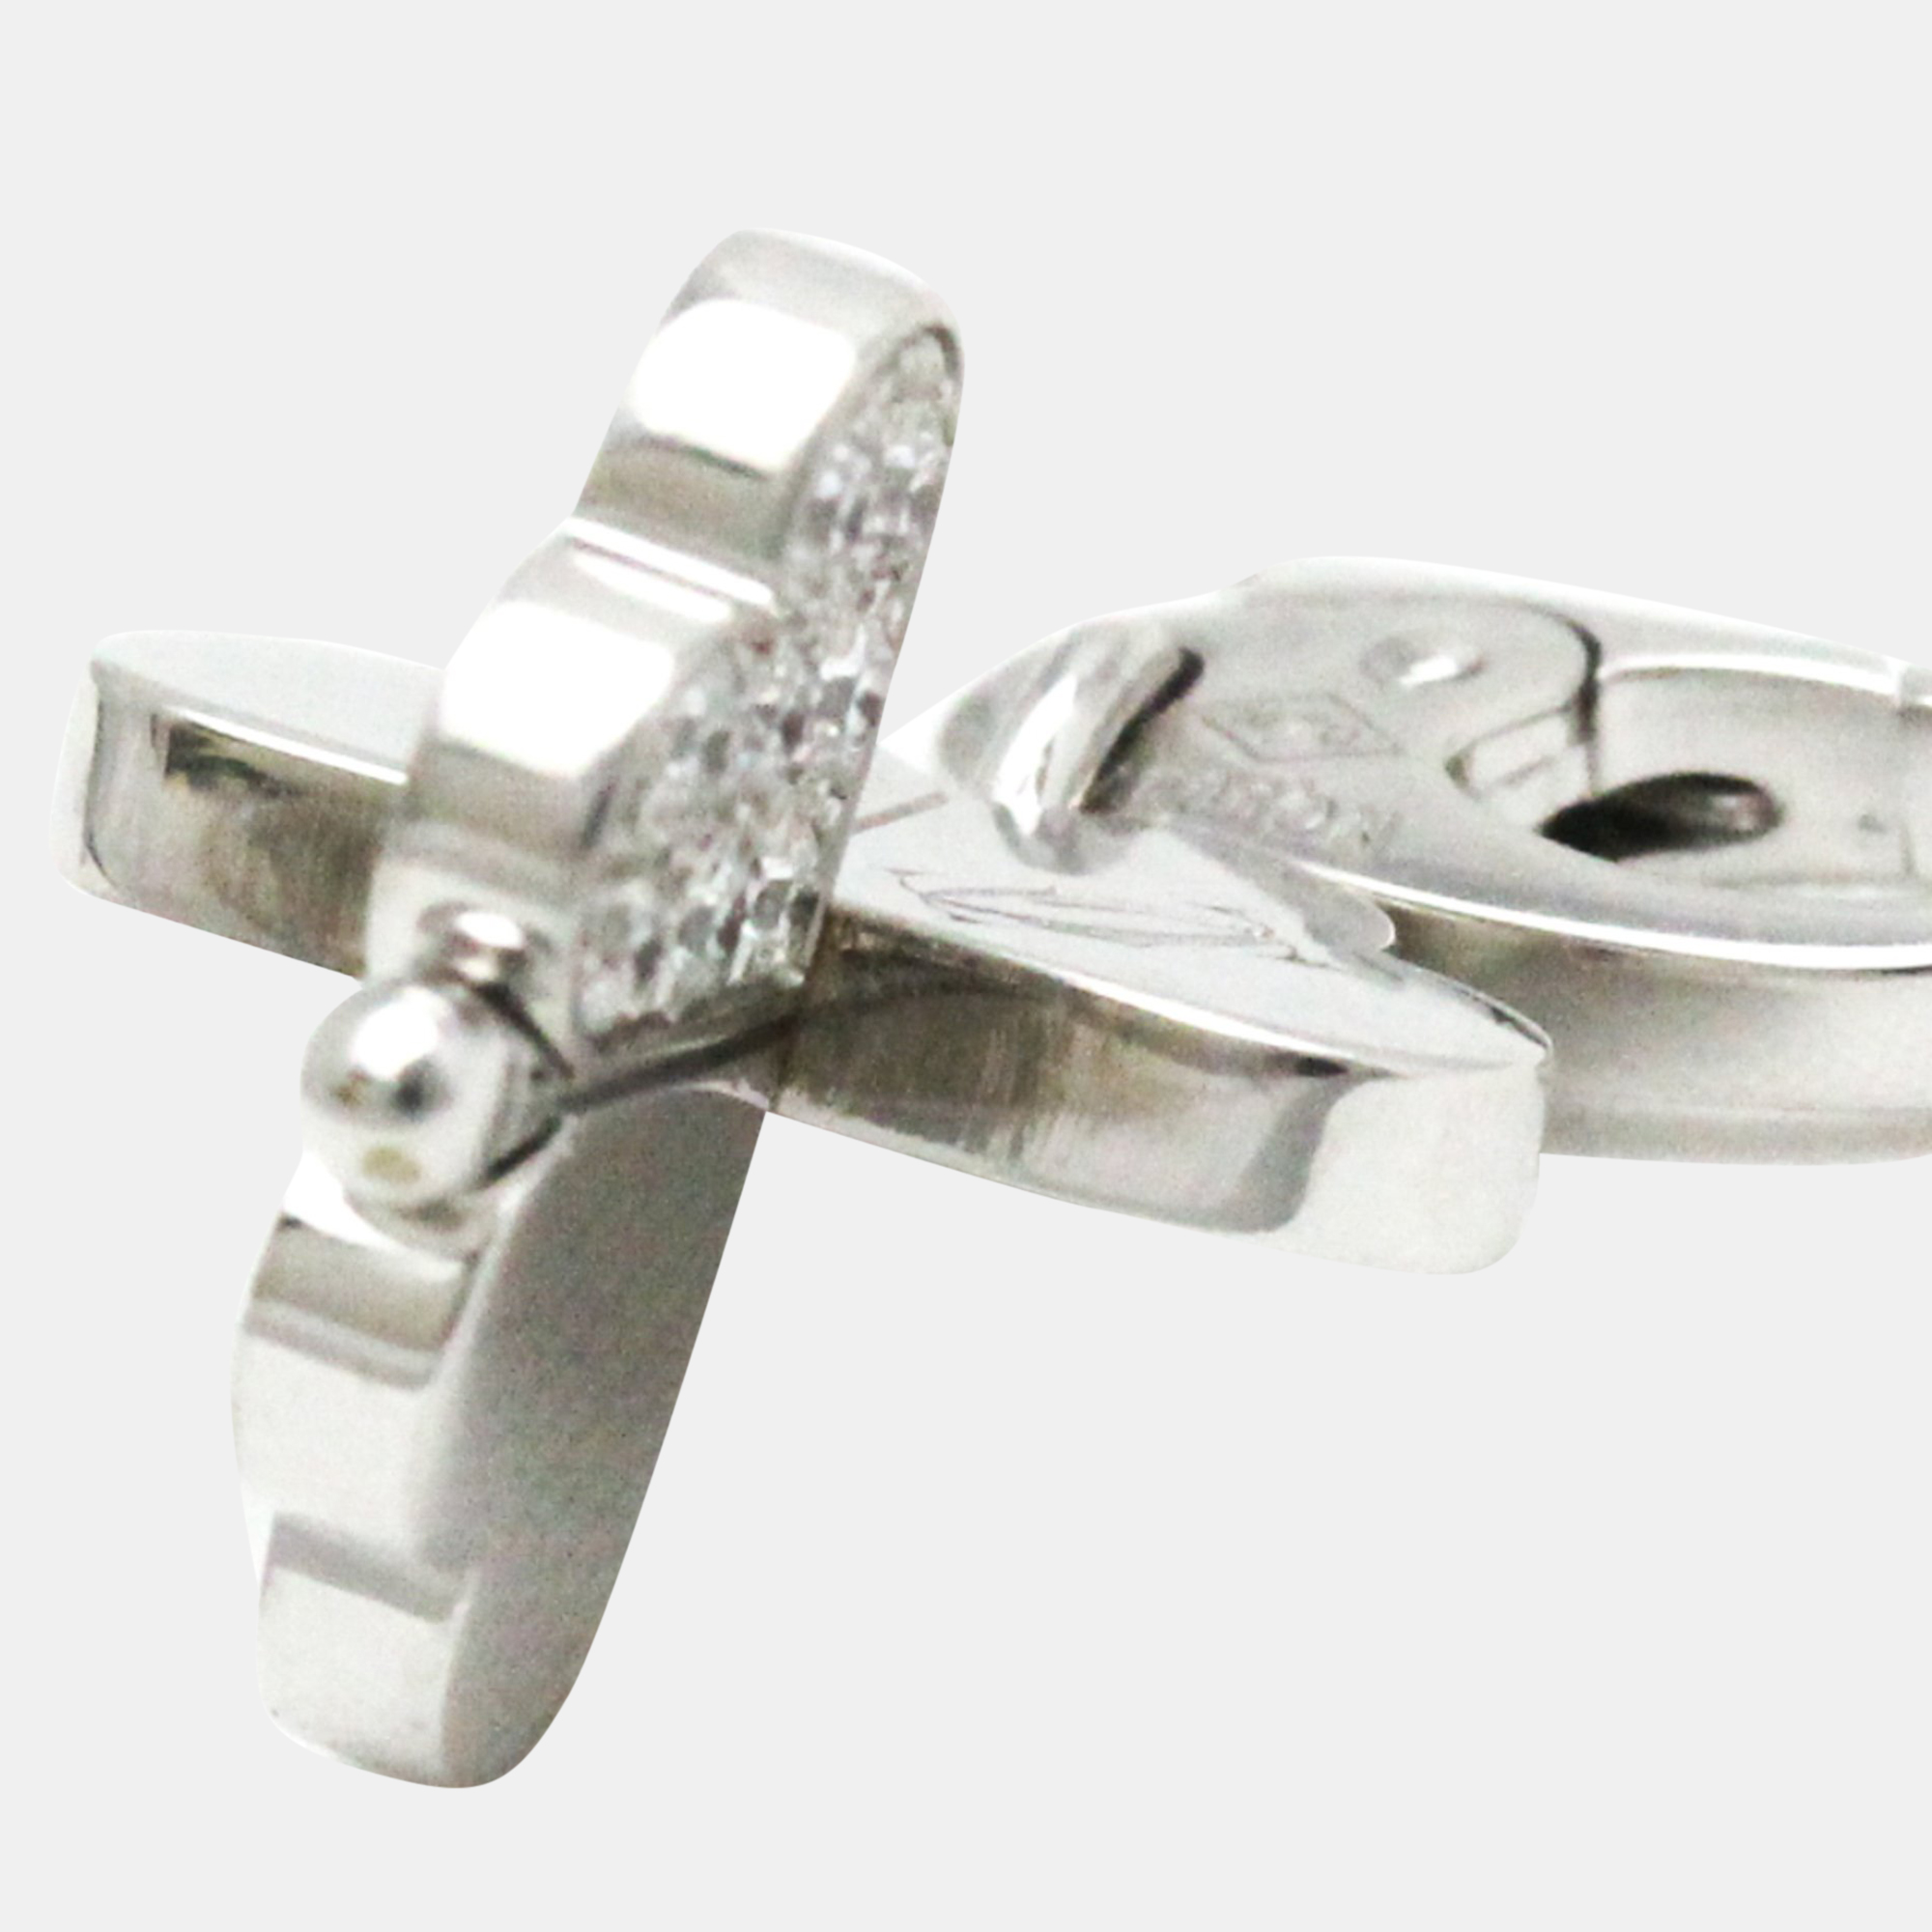 Cartier 18K White Gold And Diamond Four Leaf Clover Charm